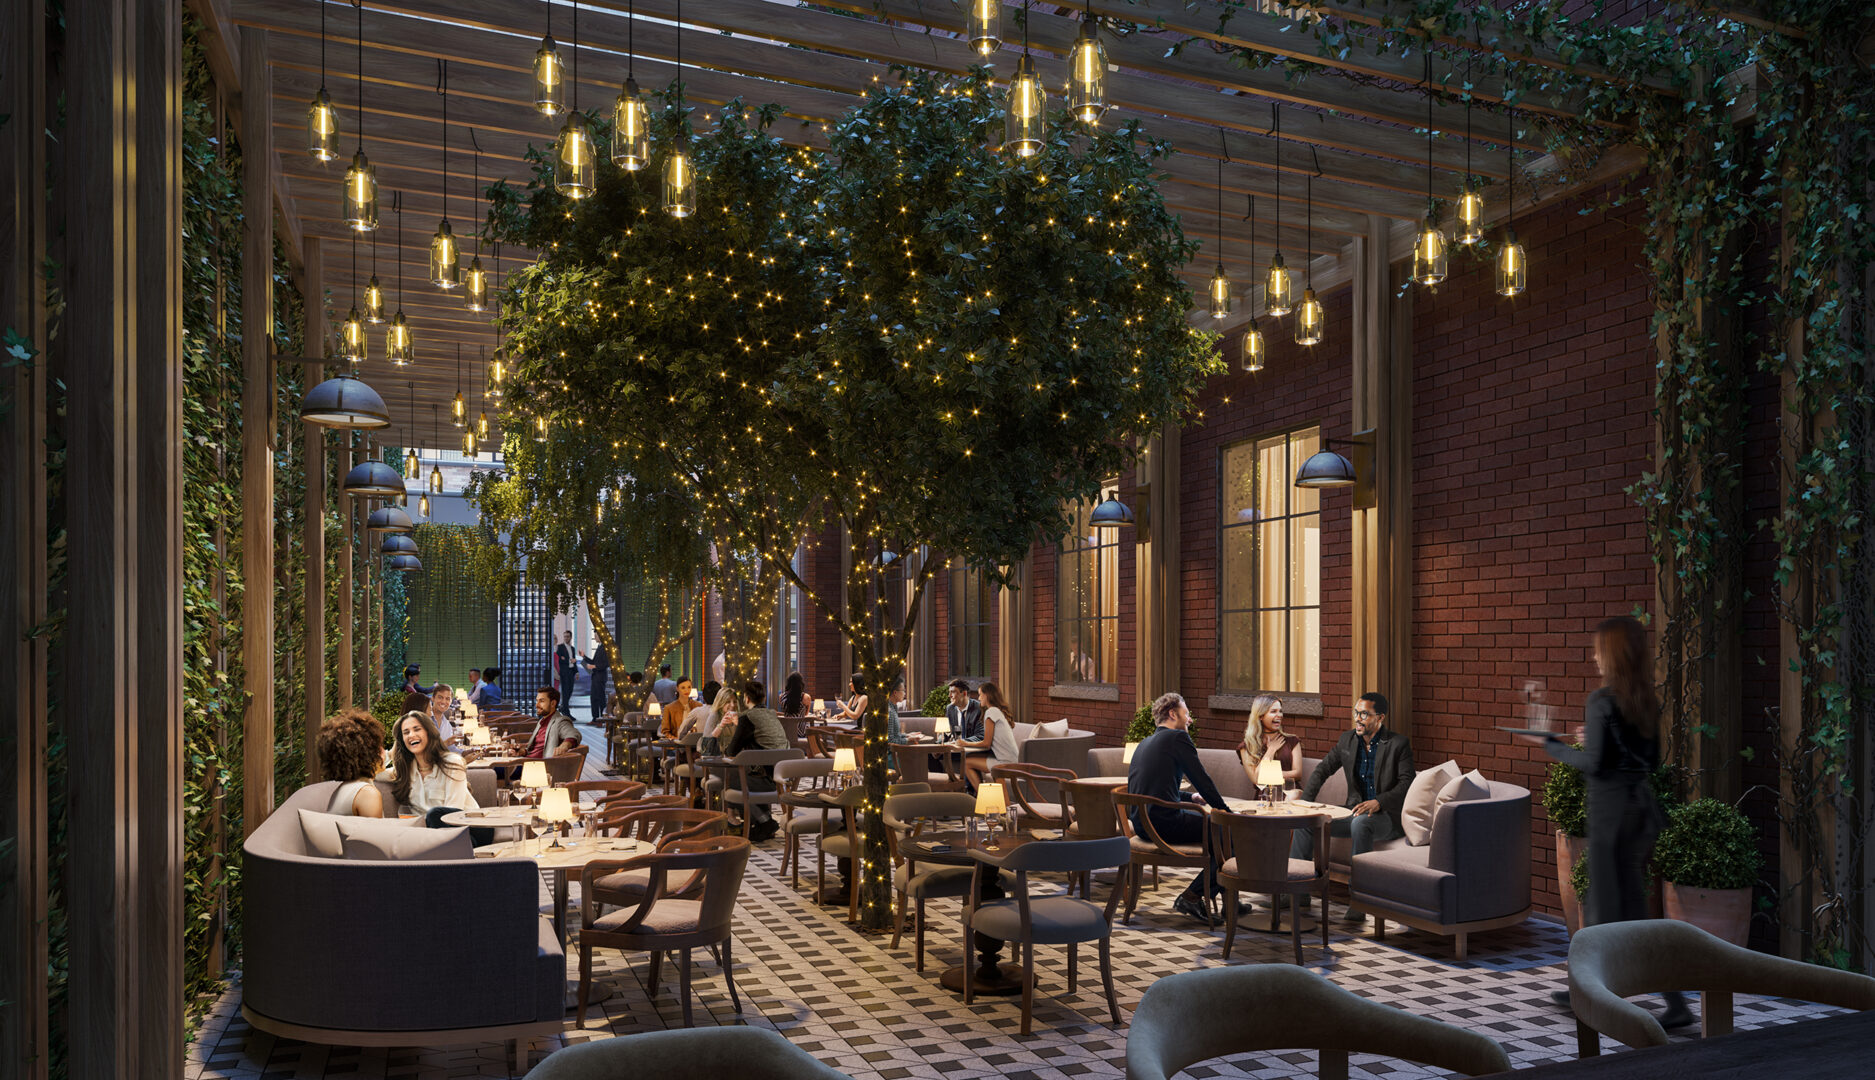 Rendering of the alleyway project showing a restaurant patio between buildings on Bay street